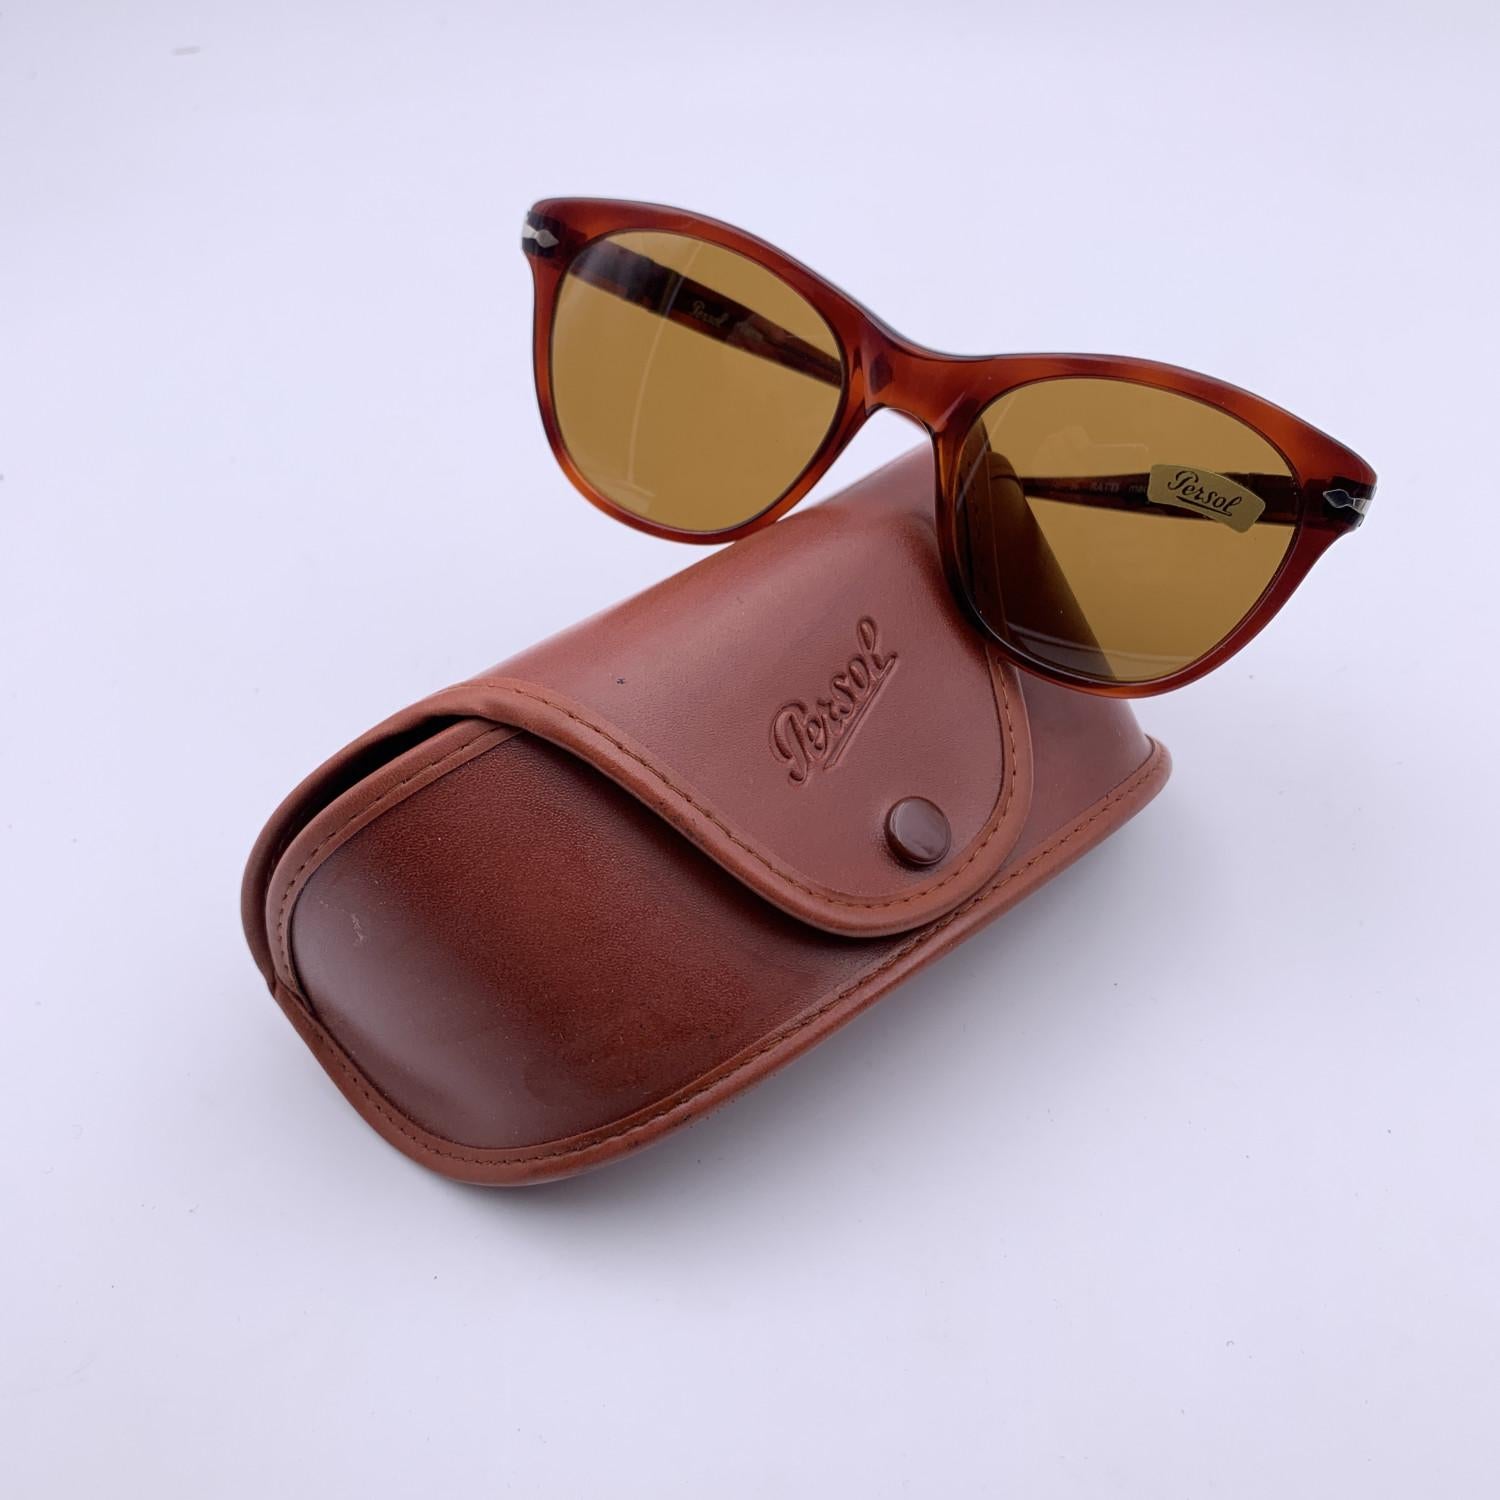 Persol Ratti sunglasses mod. 69238 from the 80s. Brown acetate frame with original Persol brown lenses ( (PERSOL signature mark on right lens). Meflecto flexible system on temples. Made in Italy

Details

MATERIAL: Acetate

COLOR: Brown

MODEL: